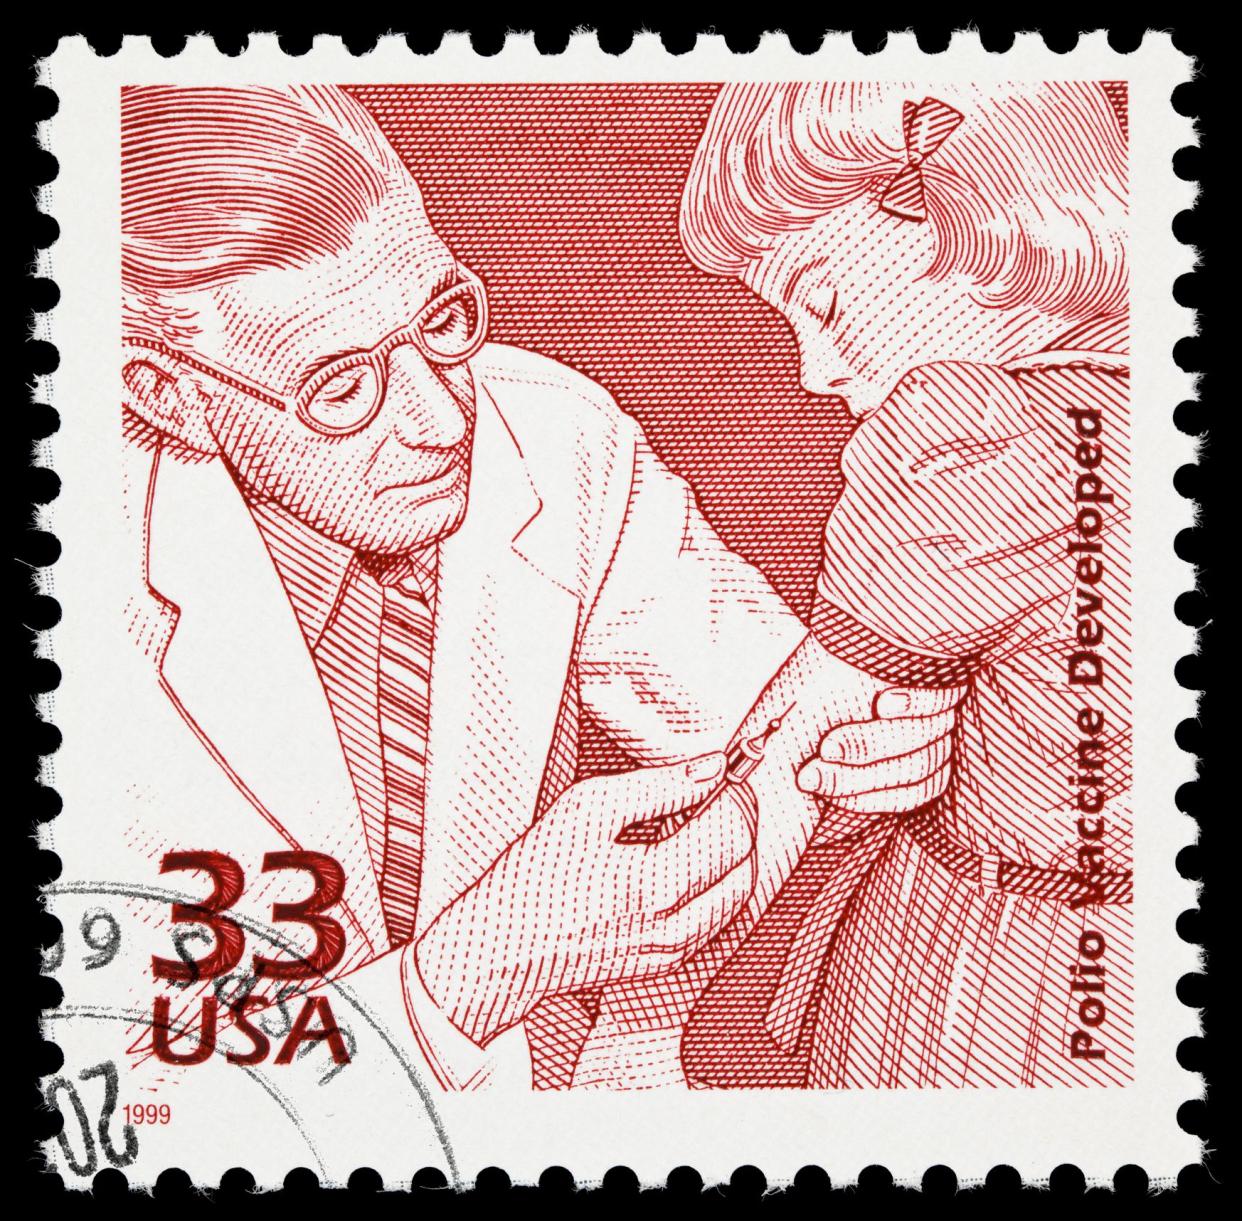 United States postage stamp commemorating the development and 1955 federal approval of the Polio vaccine.